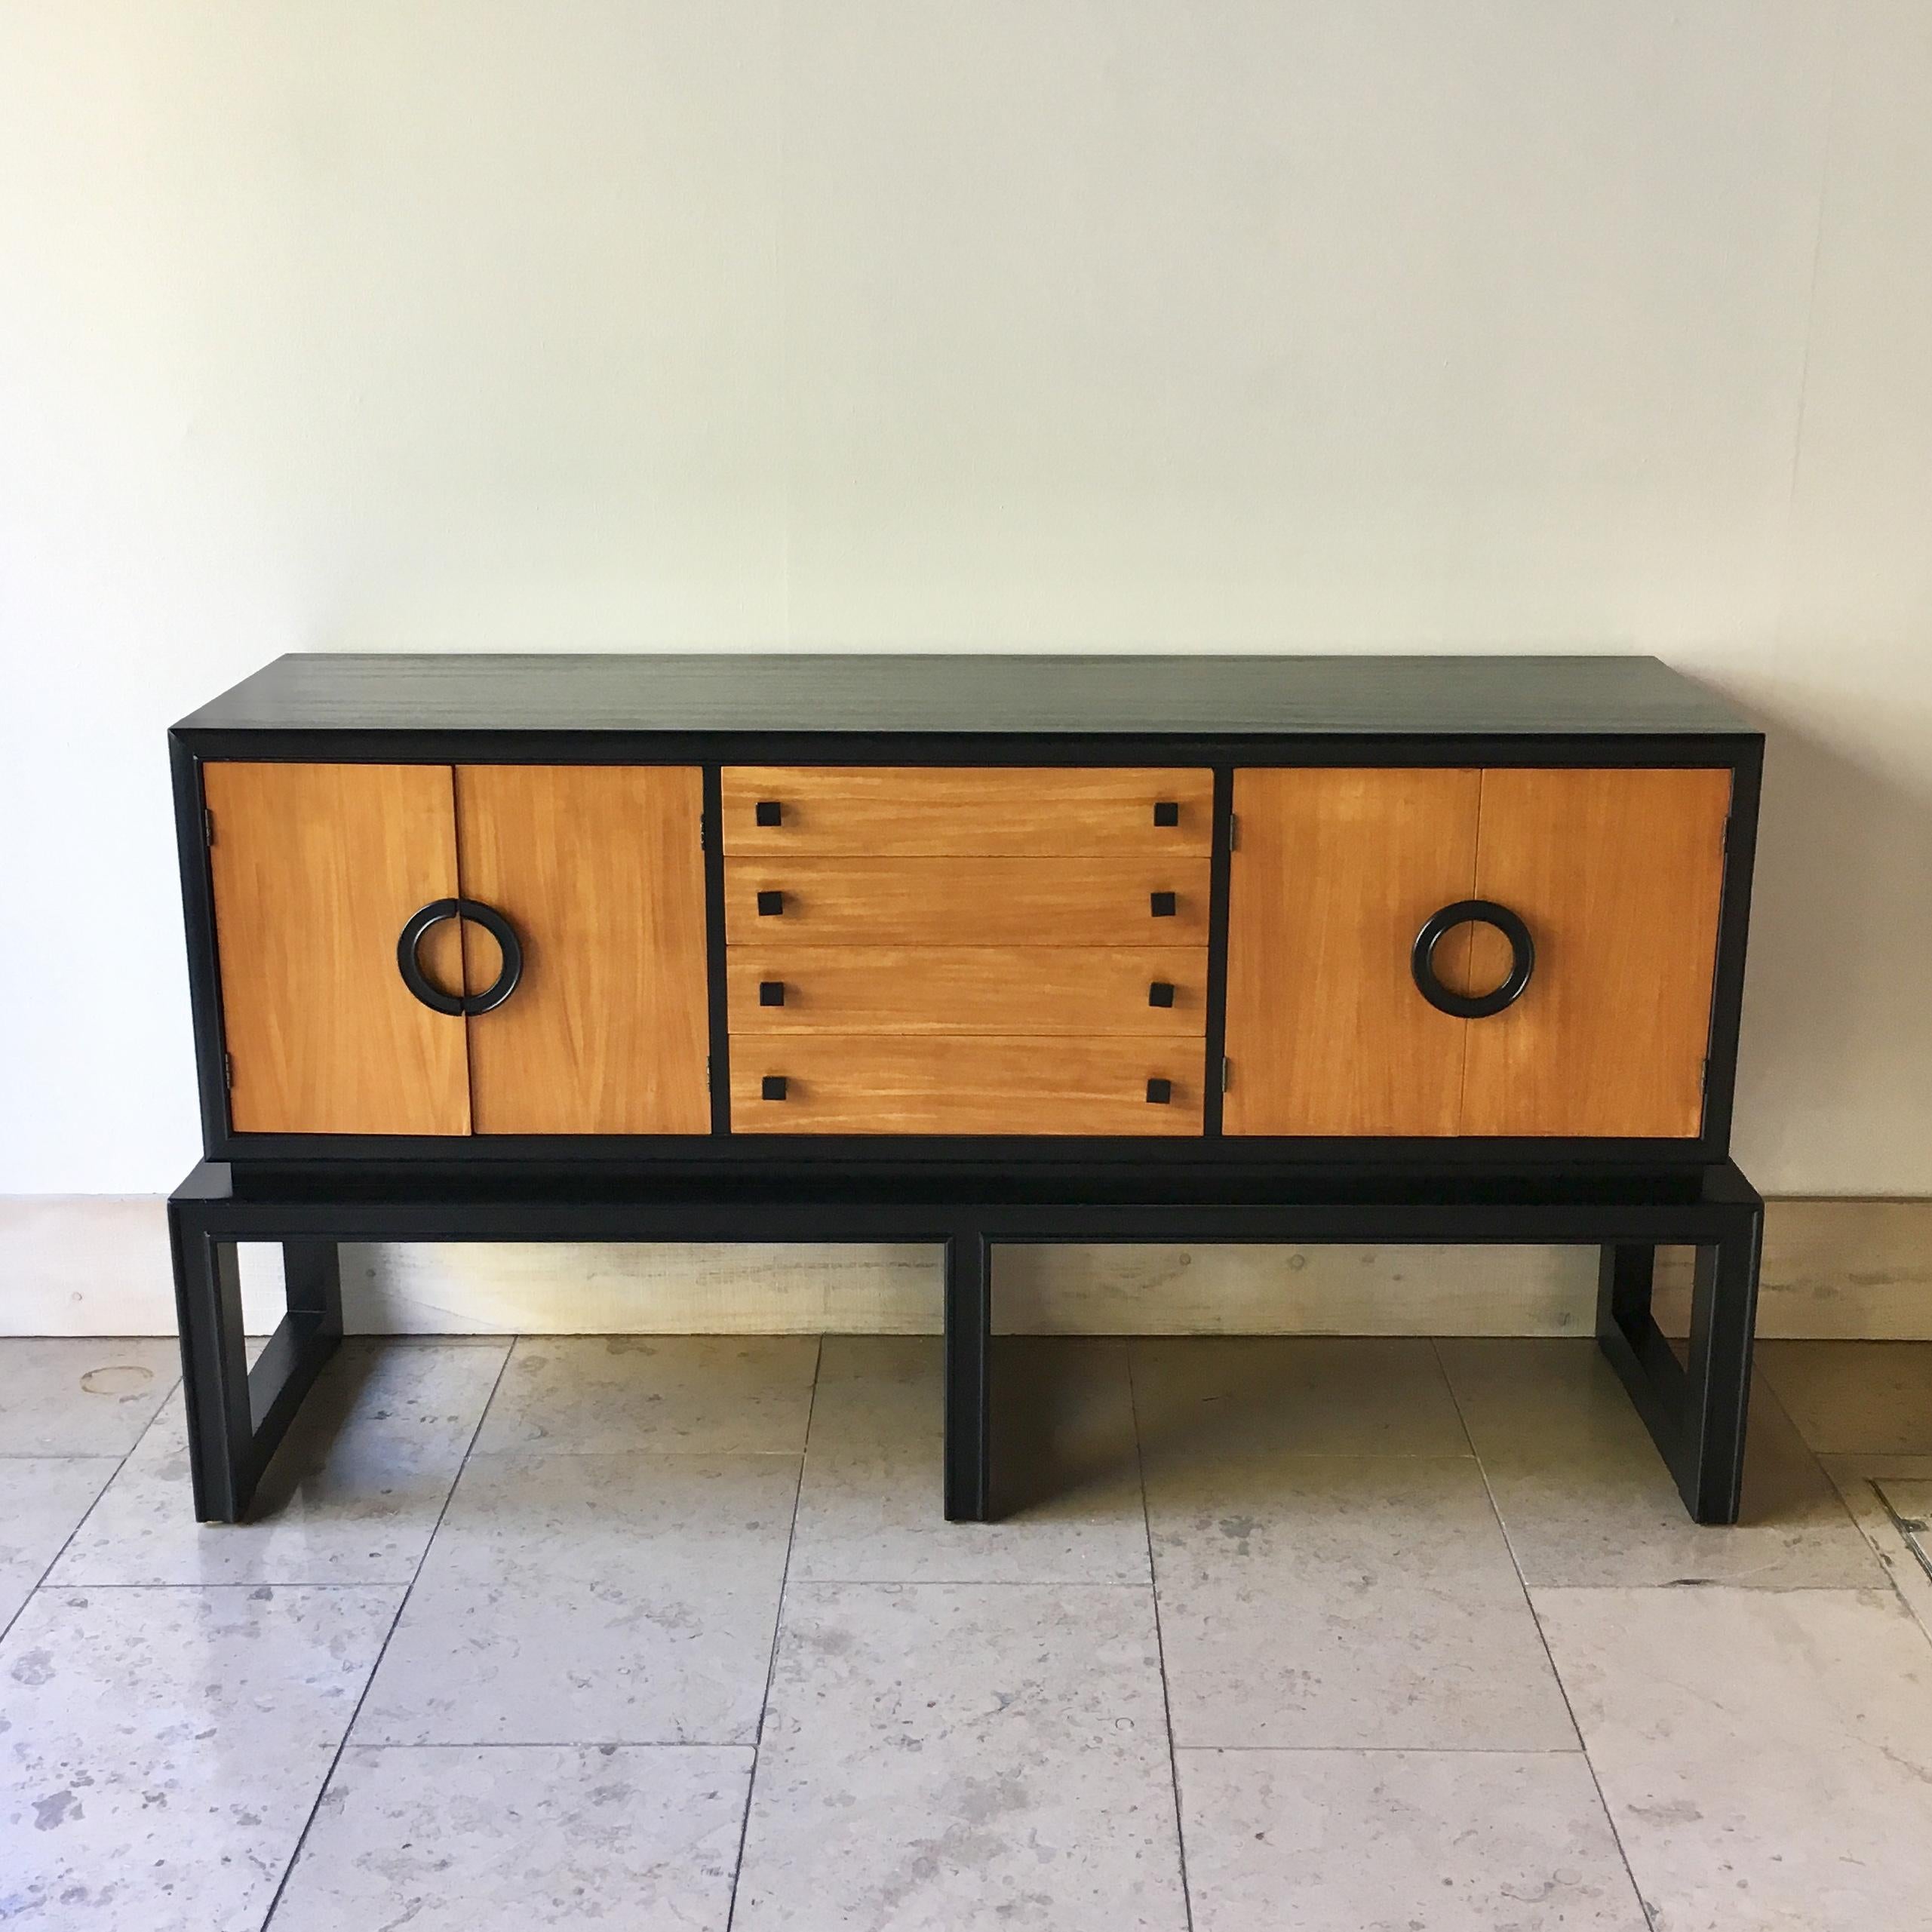 Wooden cabinet with ebonised surfaces and edges on an ebonised raised three legged plinth. The semi circle handles and square handles are ebonised. The cabinet had 2 pairs of doors flanking four drawers and is made by Americraft, 1970s.
The makers